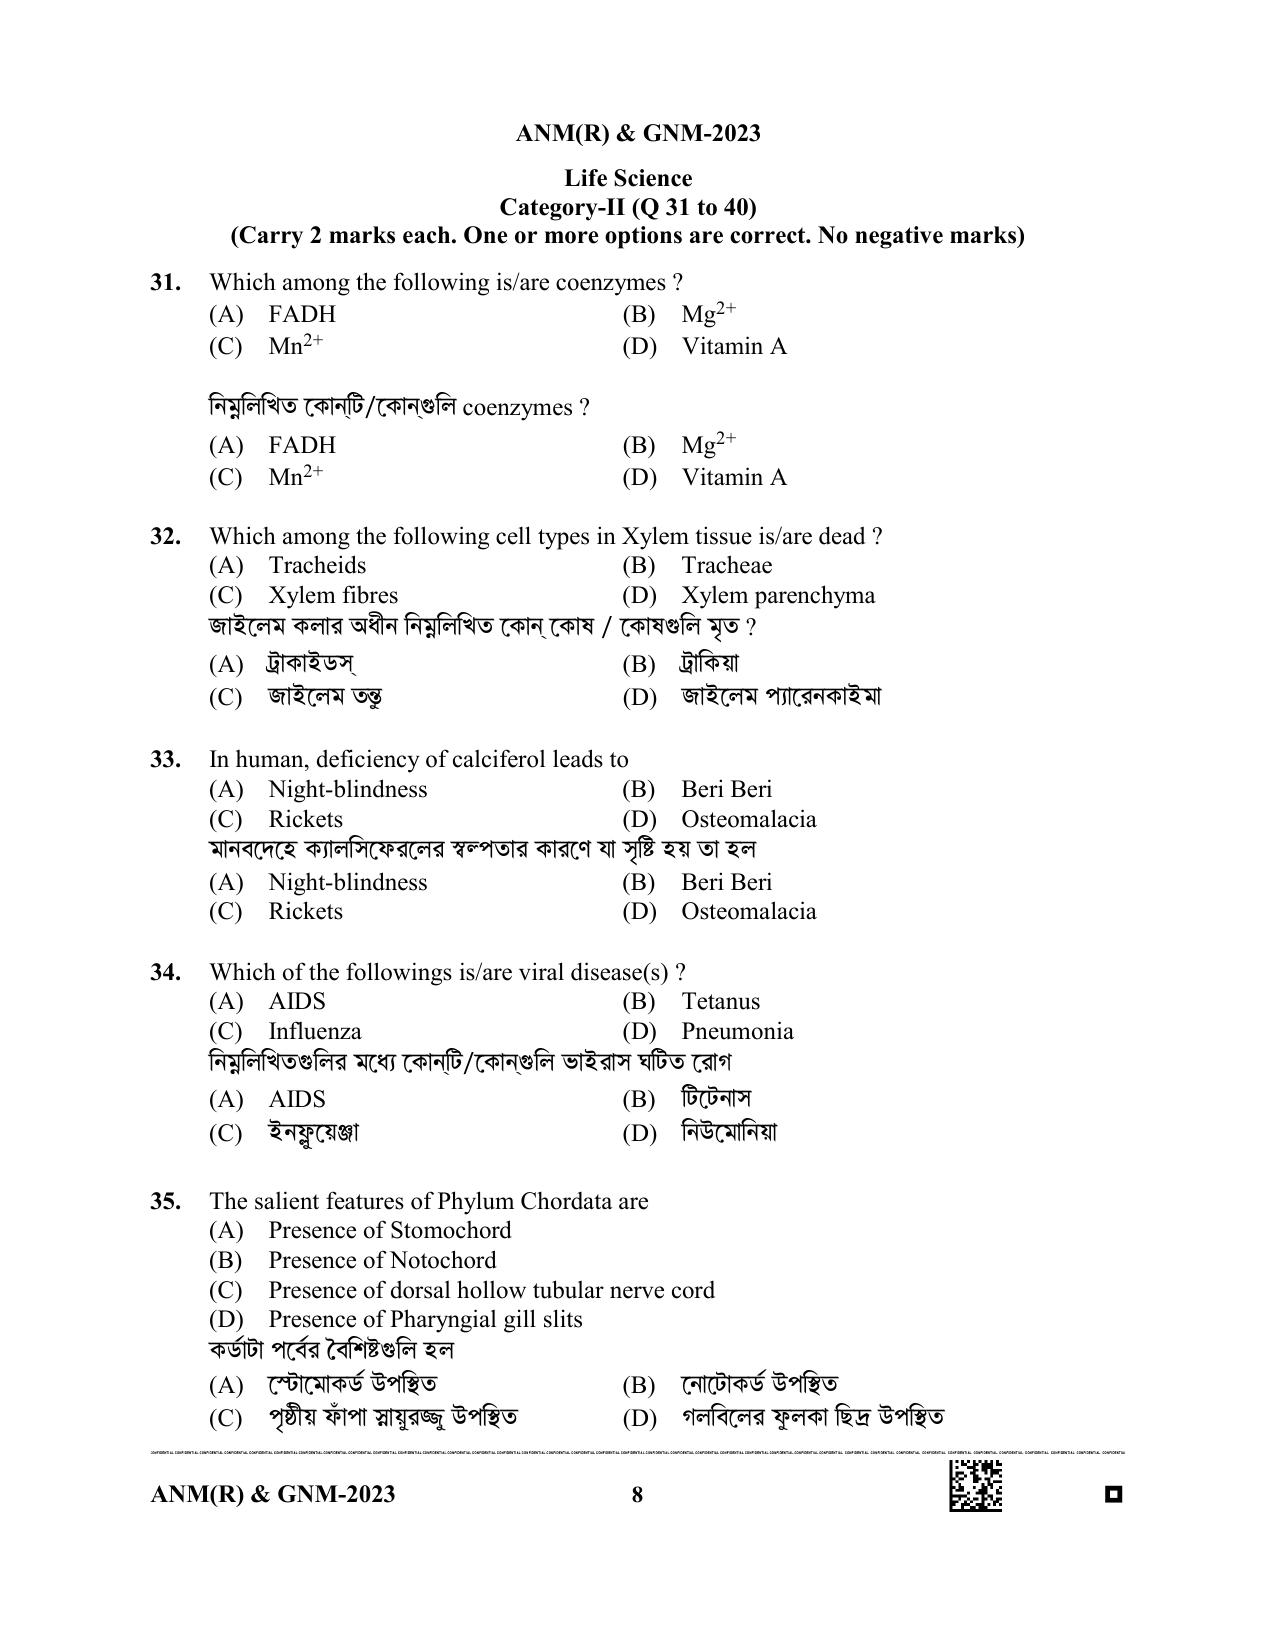 WB ANM GNM 2023 Question Paper - Page 8